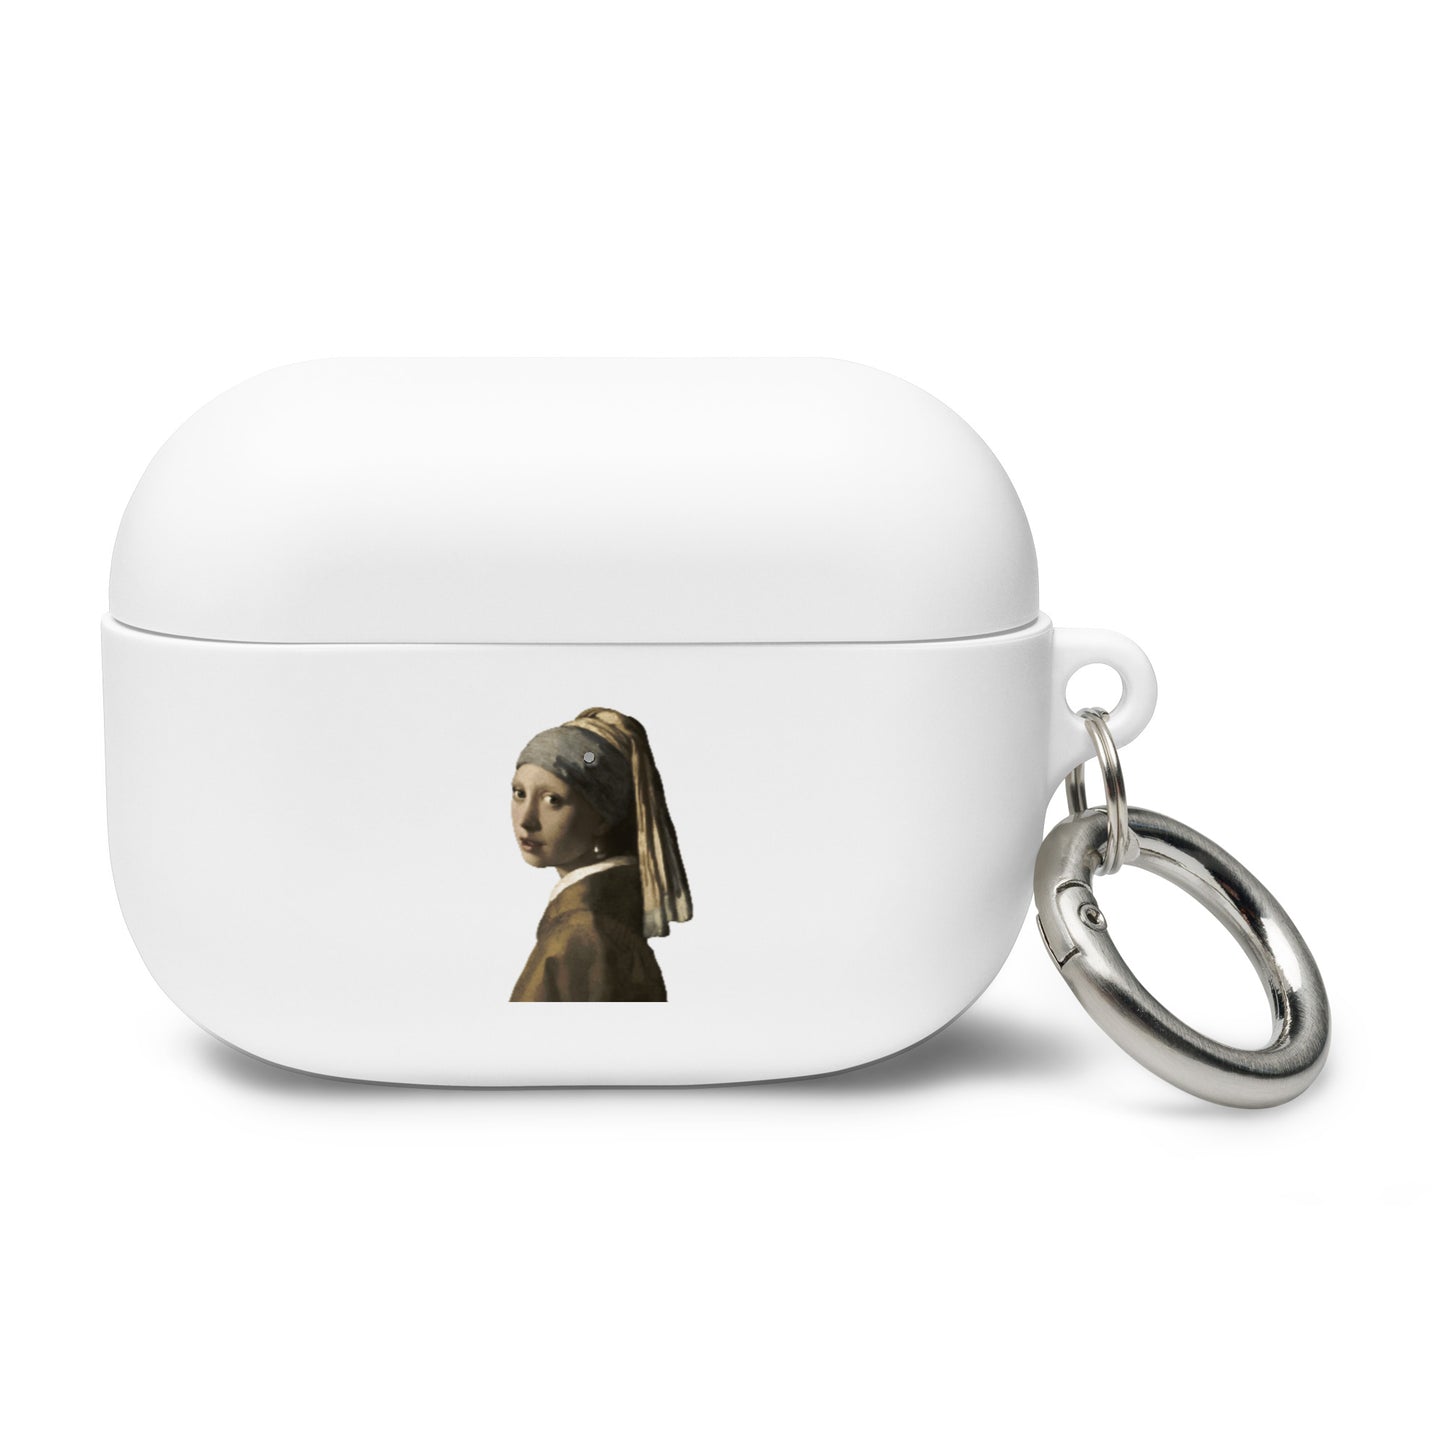 Girl with pearl earrings - AirPods® / Pro Case - Boutique de l´Art